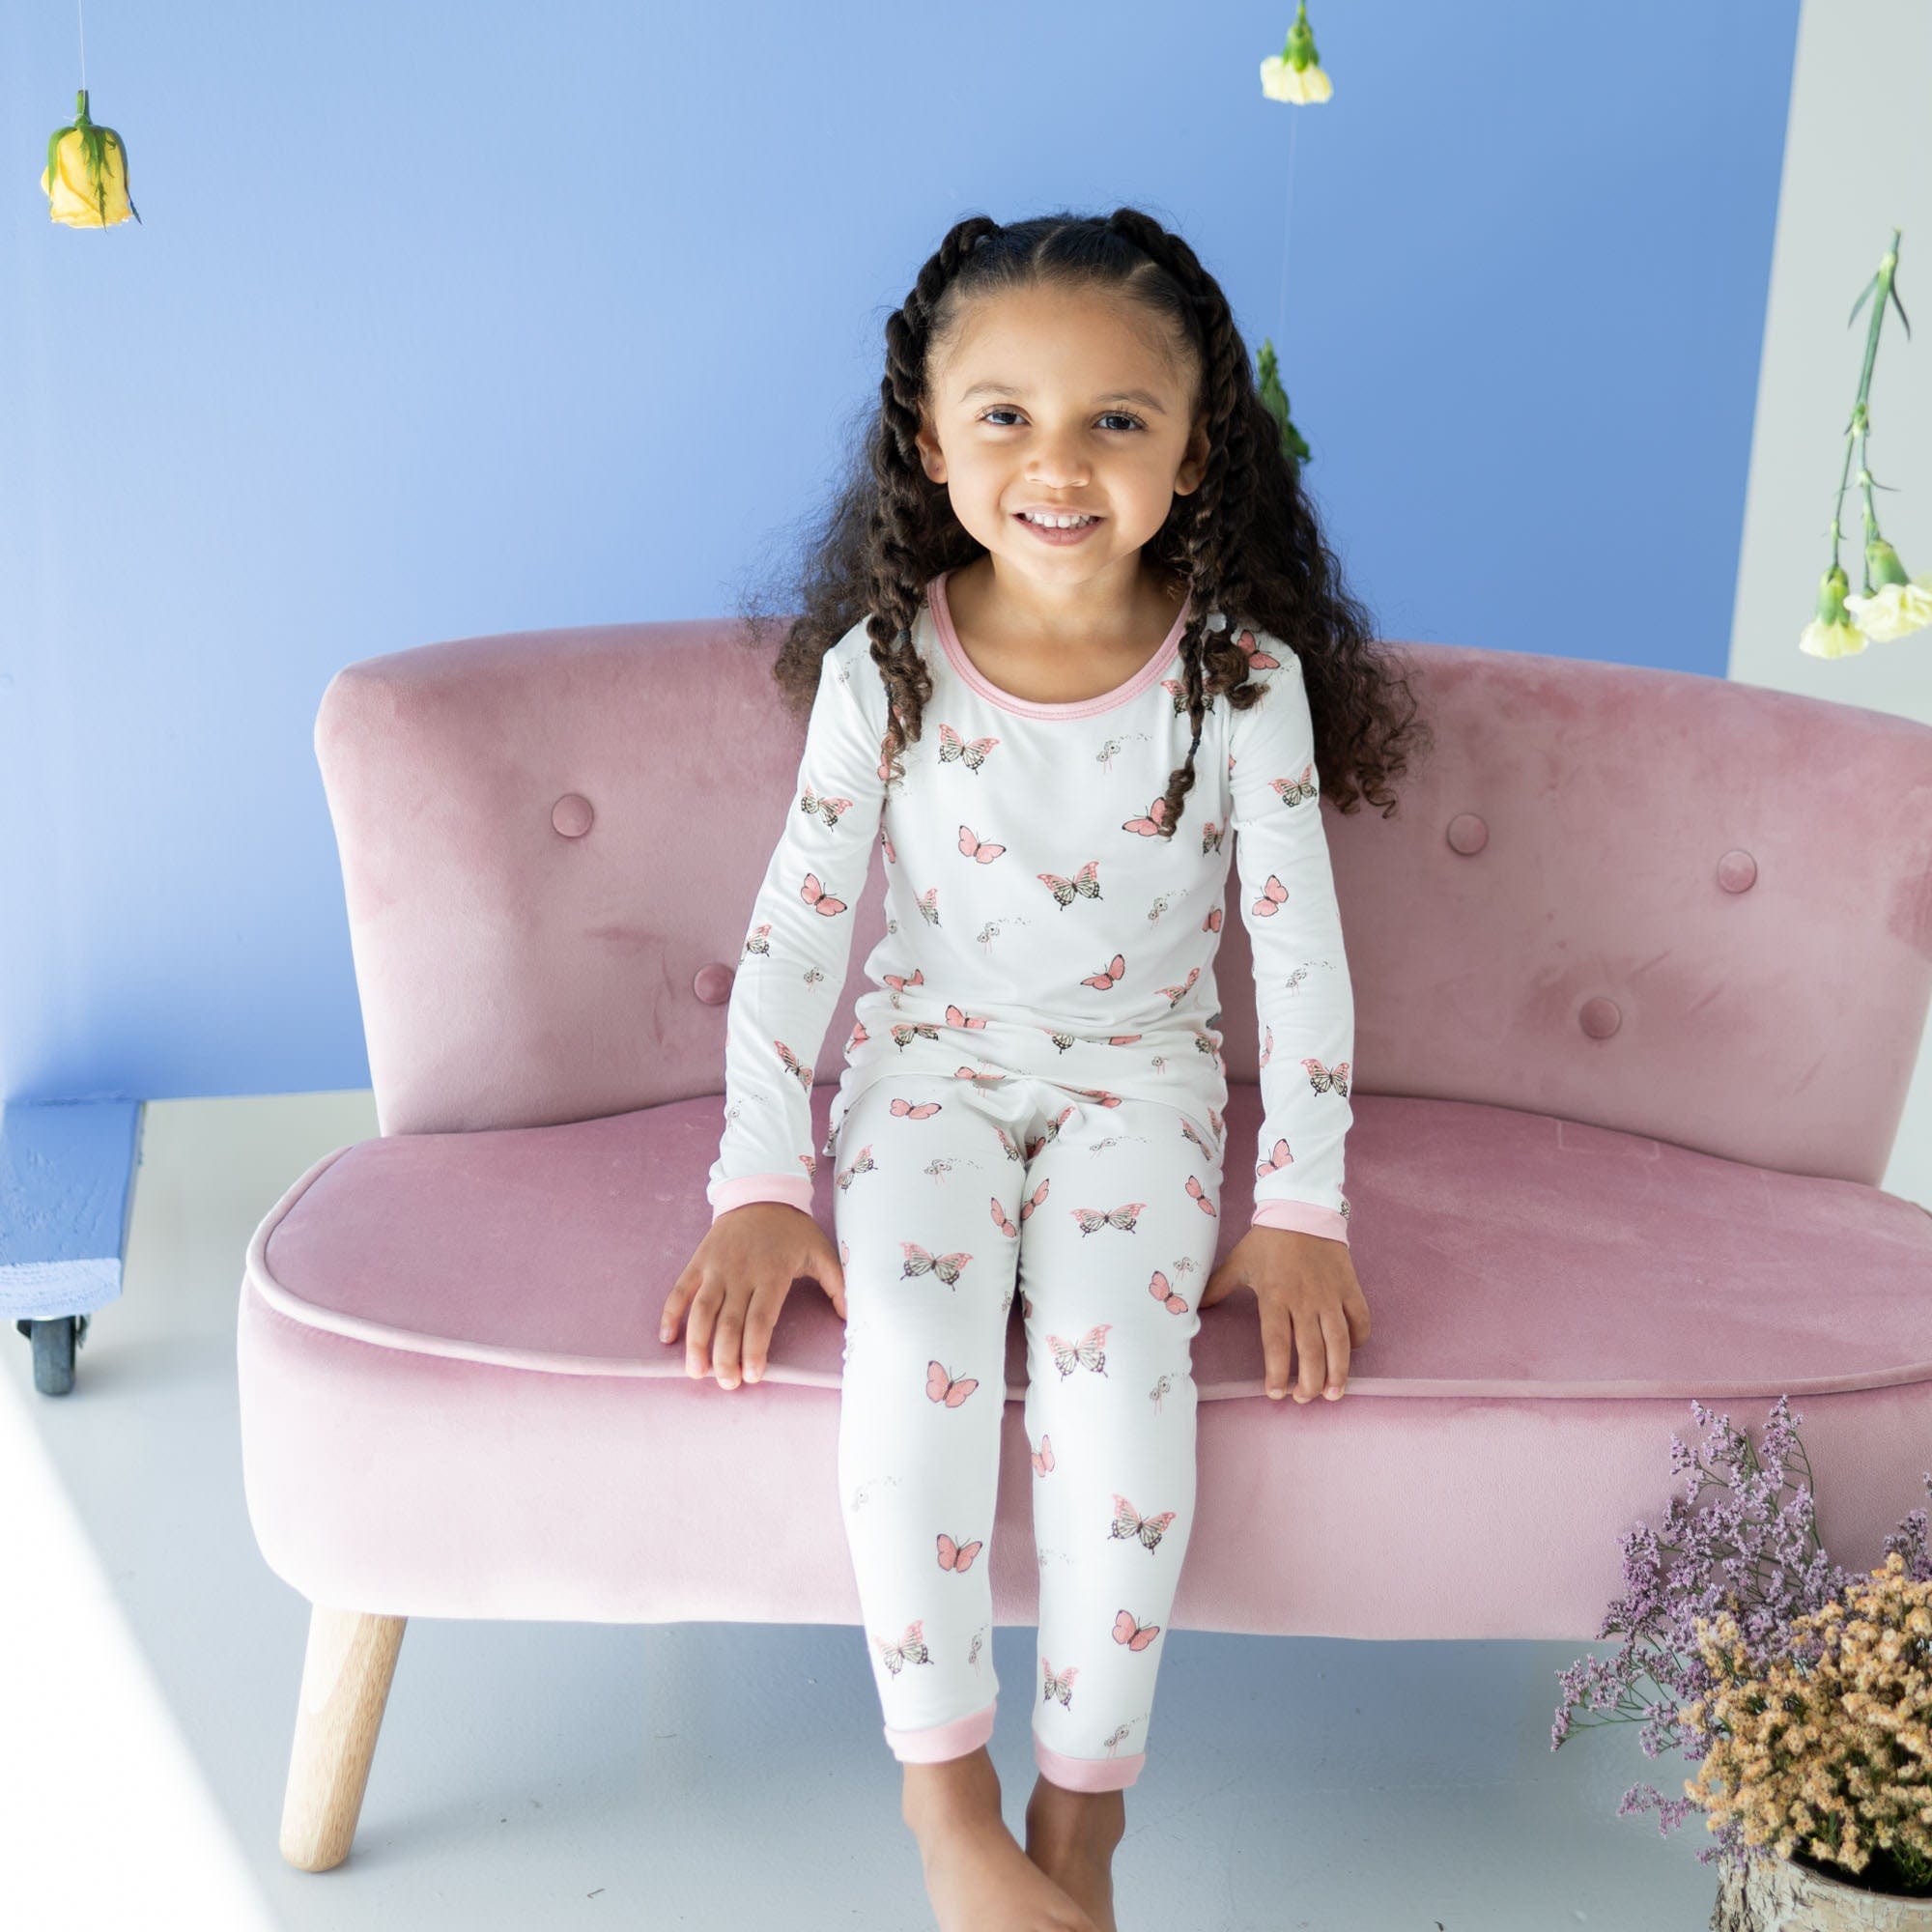 Toddler wearing Kyte Baby Long Sleeve Pajamas in Butterfly